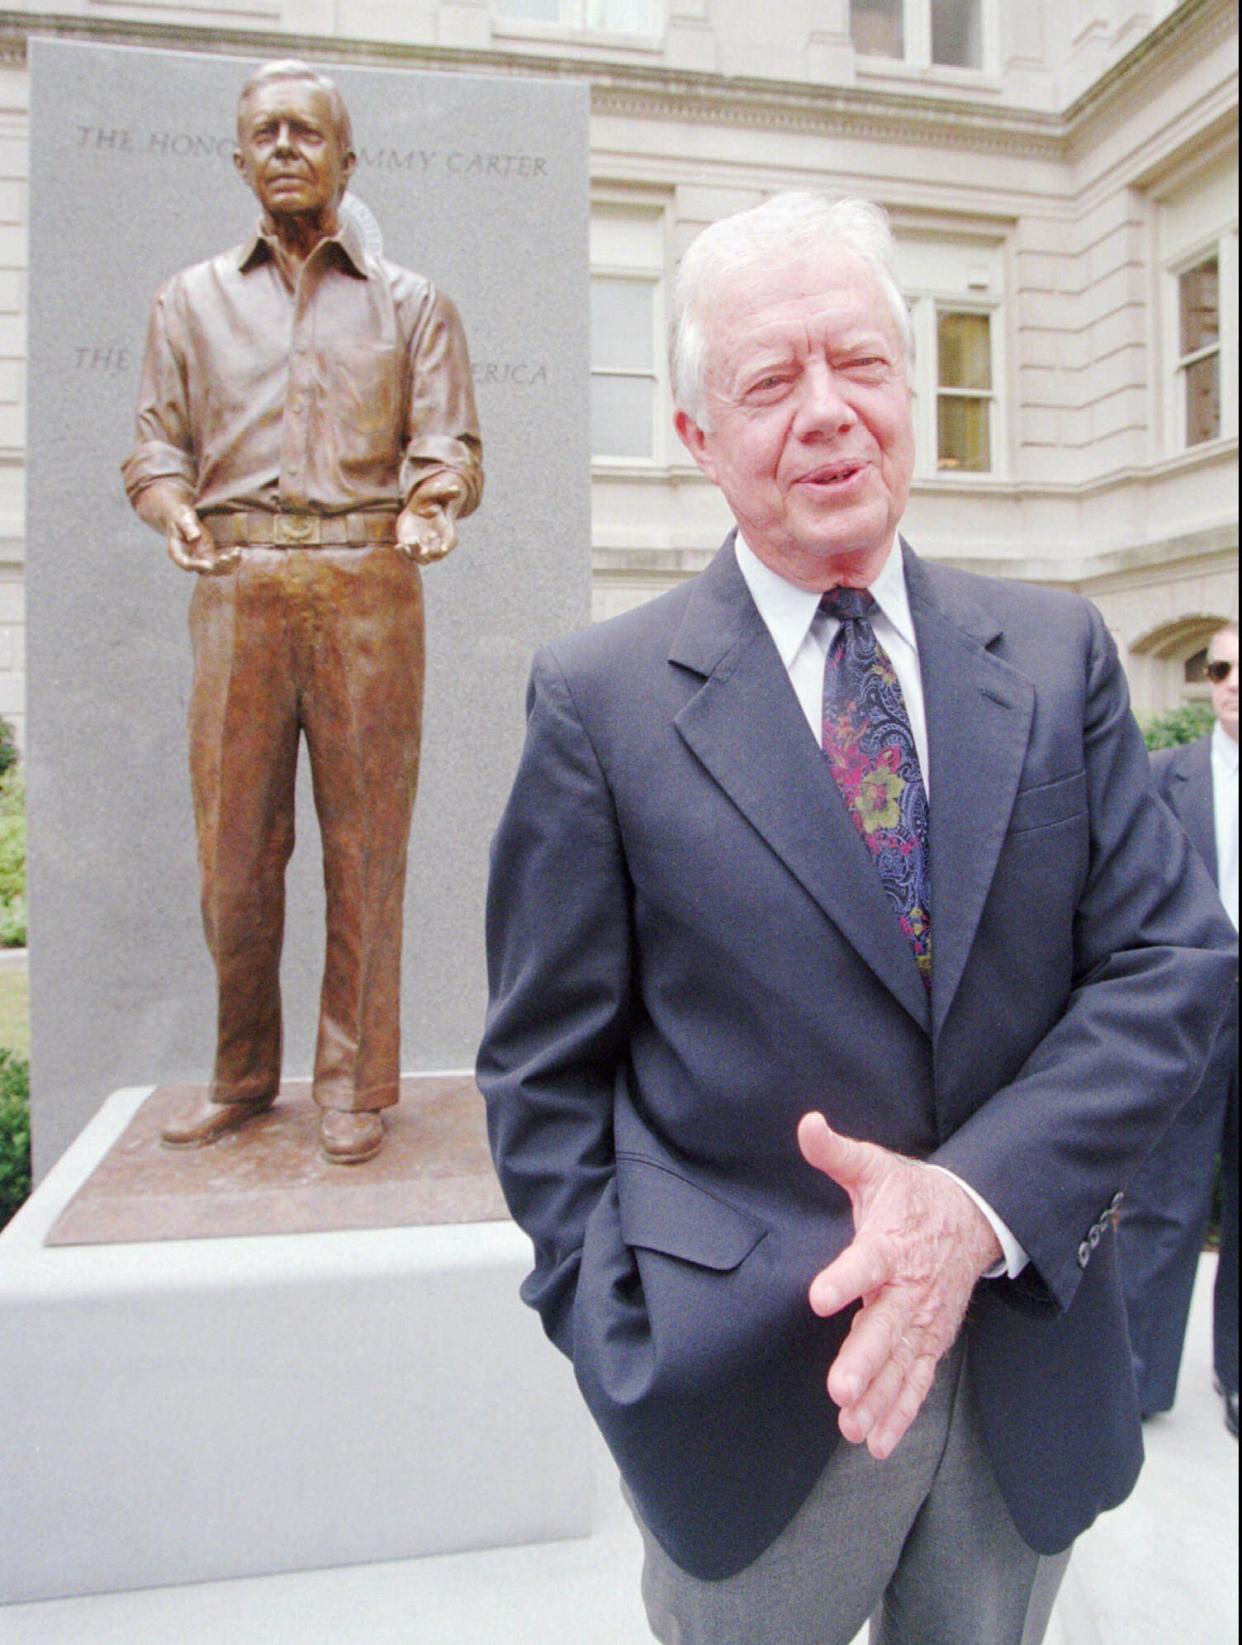 Former President Jimmy Carter speaks with reporters following the unveiling of a statue of him on the grounds of the Georgia State Capitol on June 7, 1994, in Atlanta. The sculpture, by Frederick Hart, shows former President Carter in an informal pose and casual dress with his sleeves rolled up, honoring his roots as a farmer.